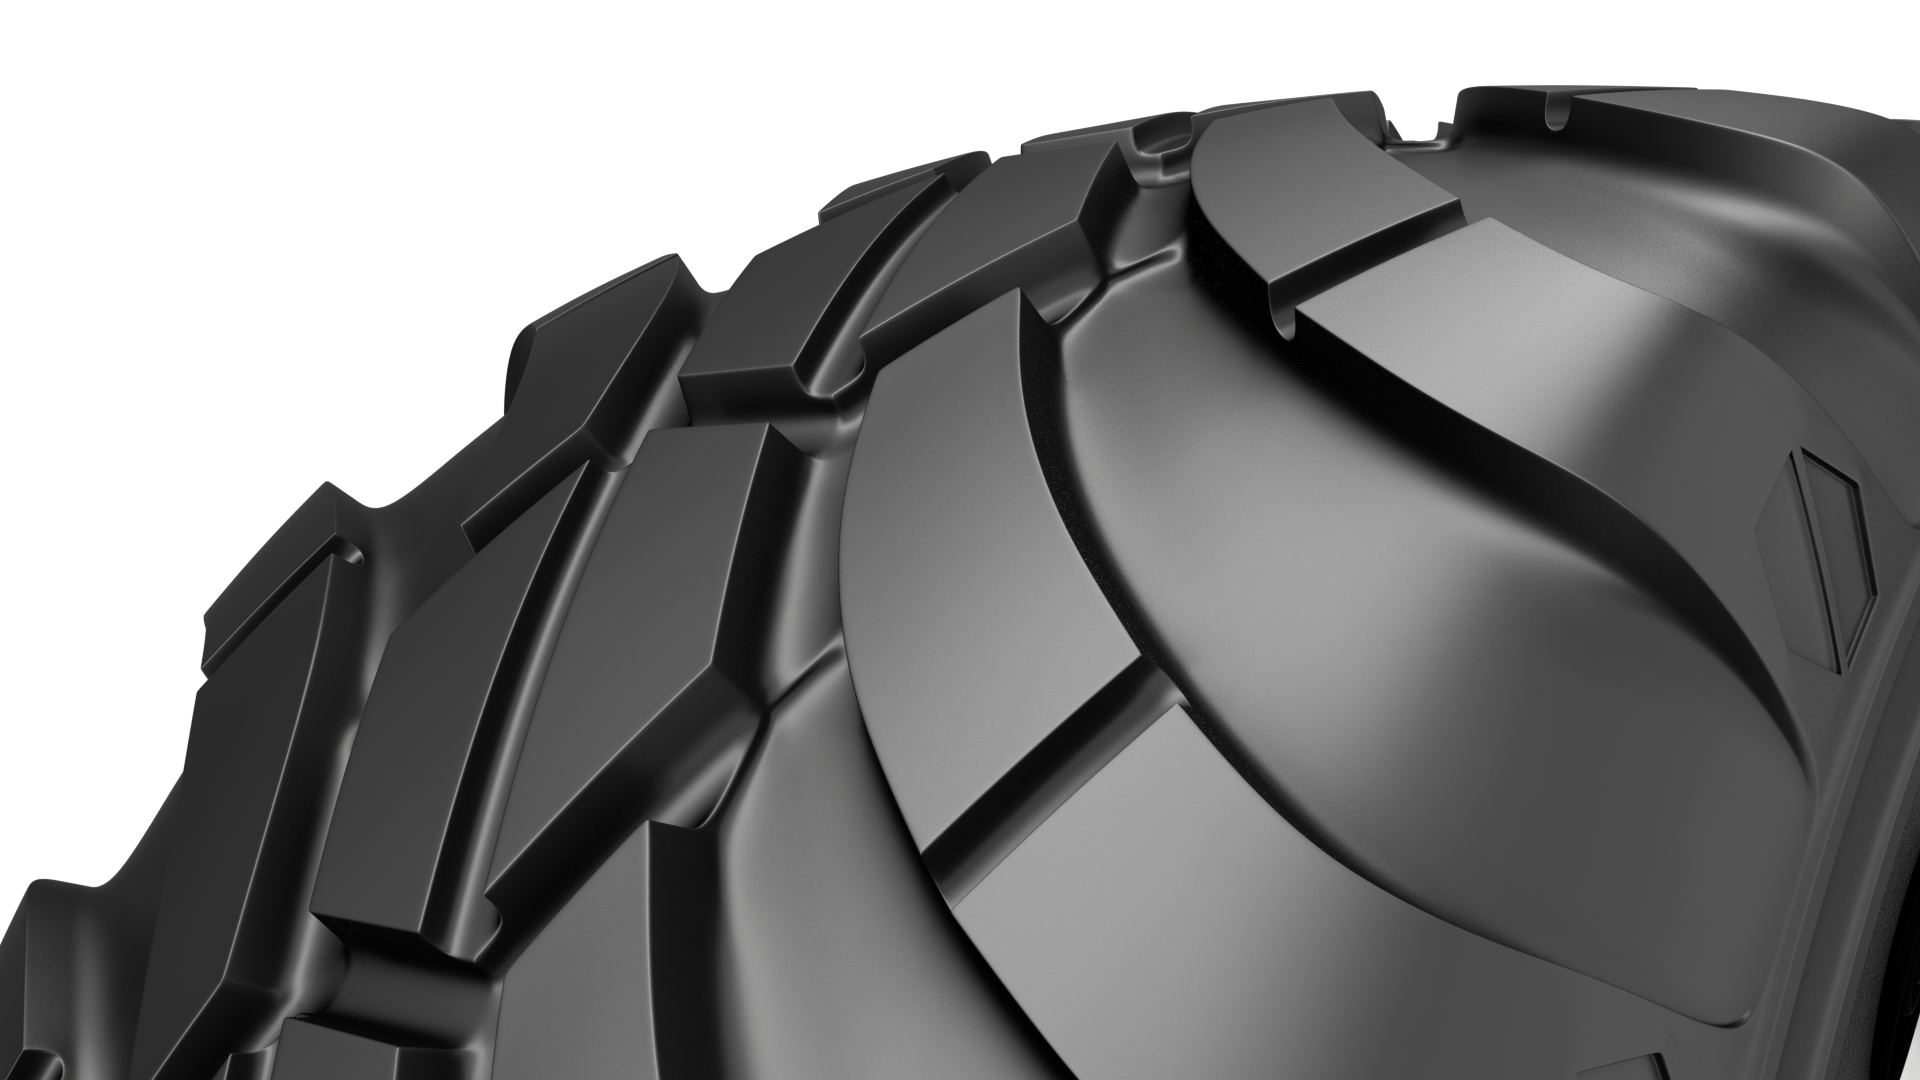 FLOTSTAR GALAXY AGRICULTURE Tire